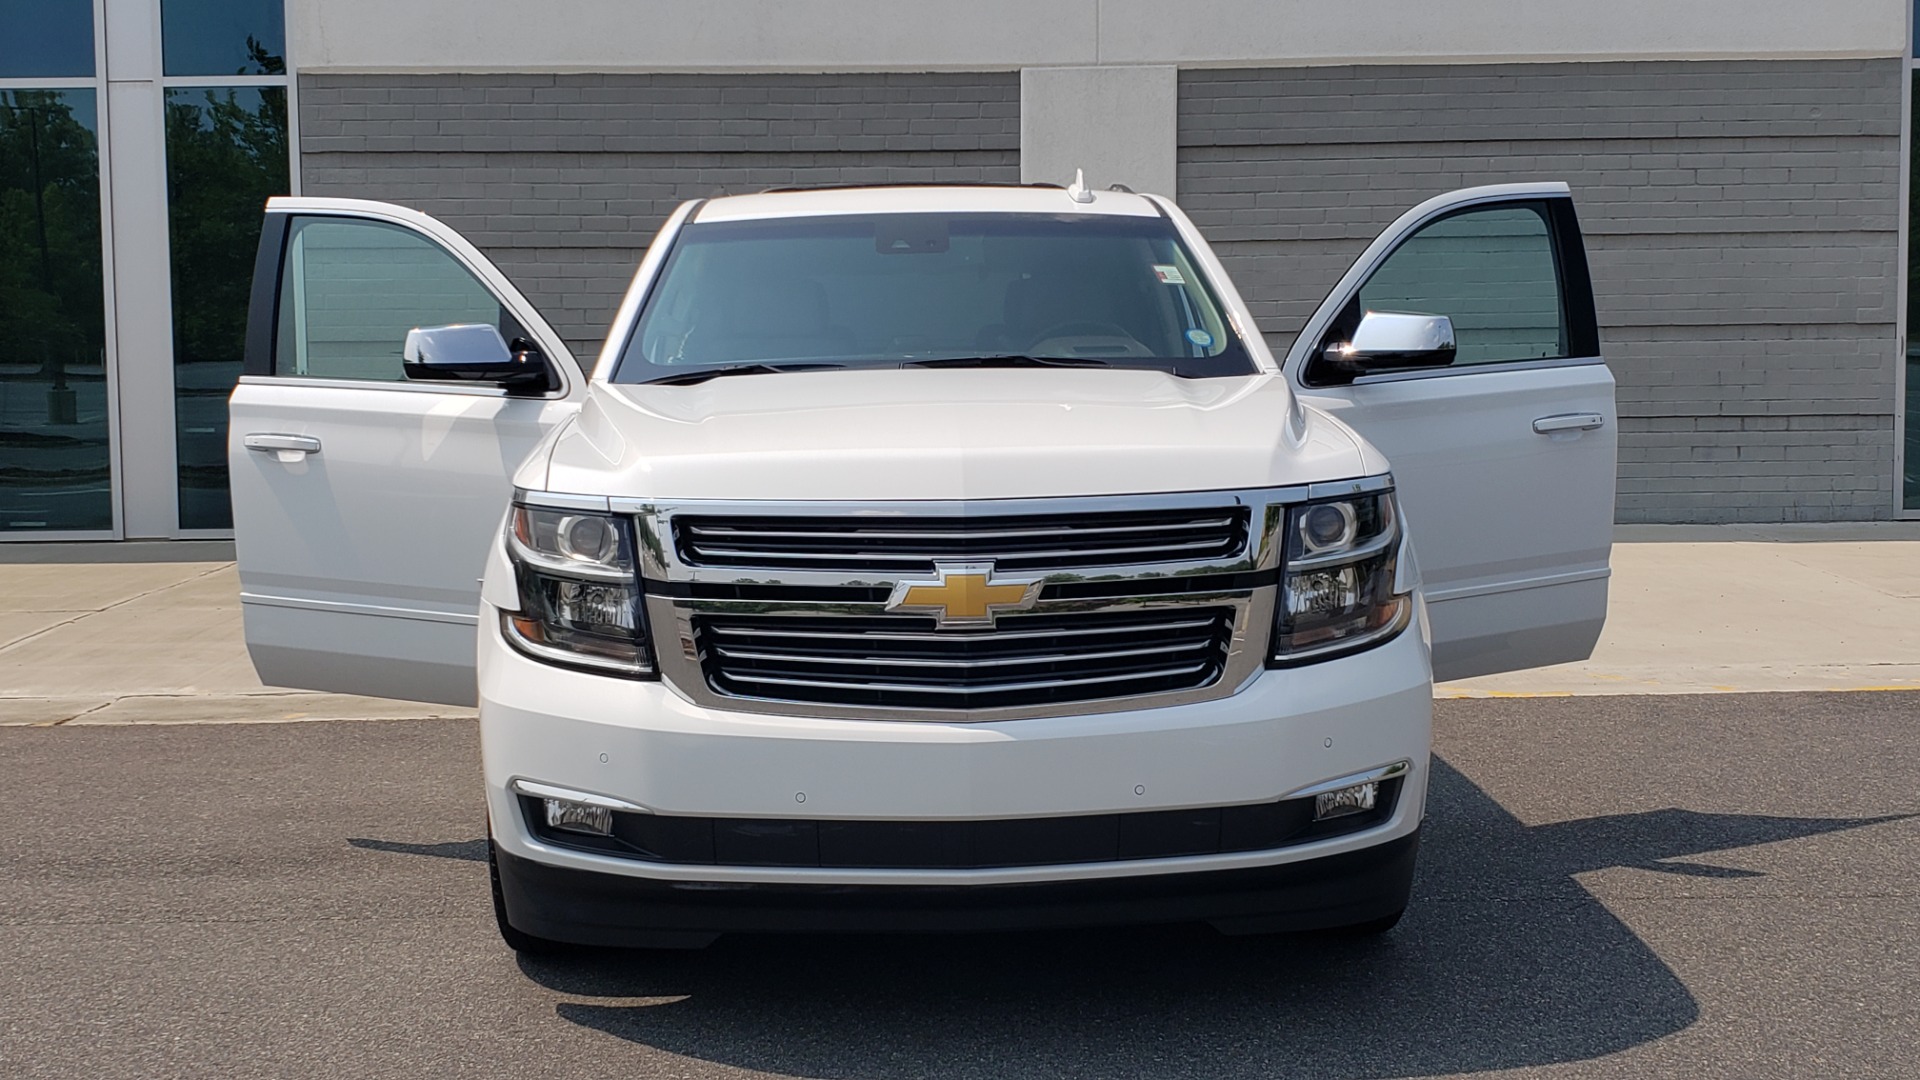 Used 2018 Chevrolet TAHOE PREMIER 4WD / NAV / SUNROOF / BOSE / 3-ROW / HUD / REARVIEW for sale Sold at Formula Imports in Charlotte NC 28227 25